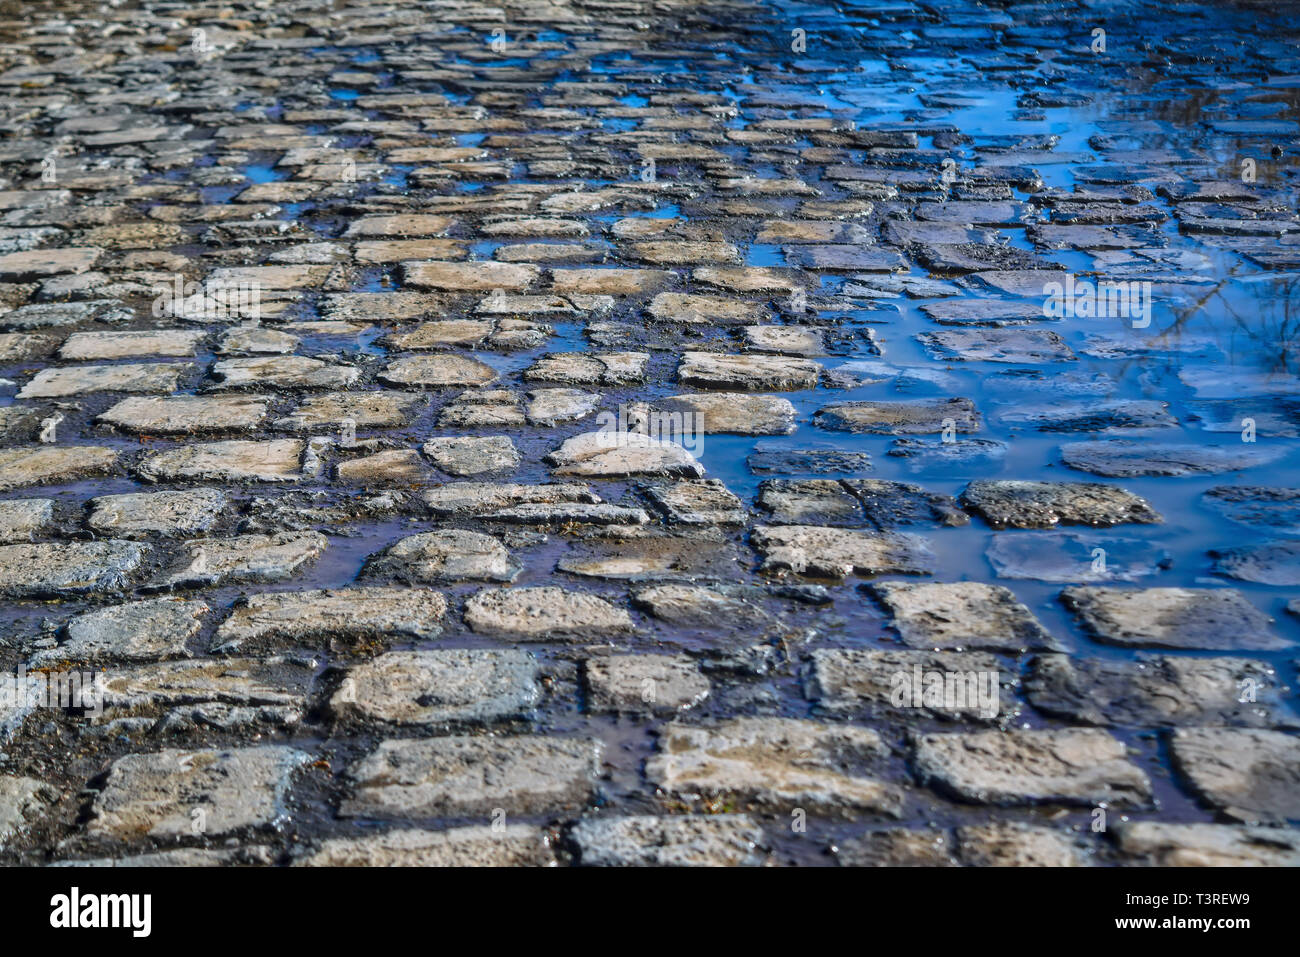 Blue spring sky reflected in the puddles on the cobblestone pavement close-up. Stock Photo